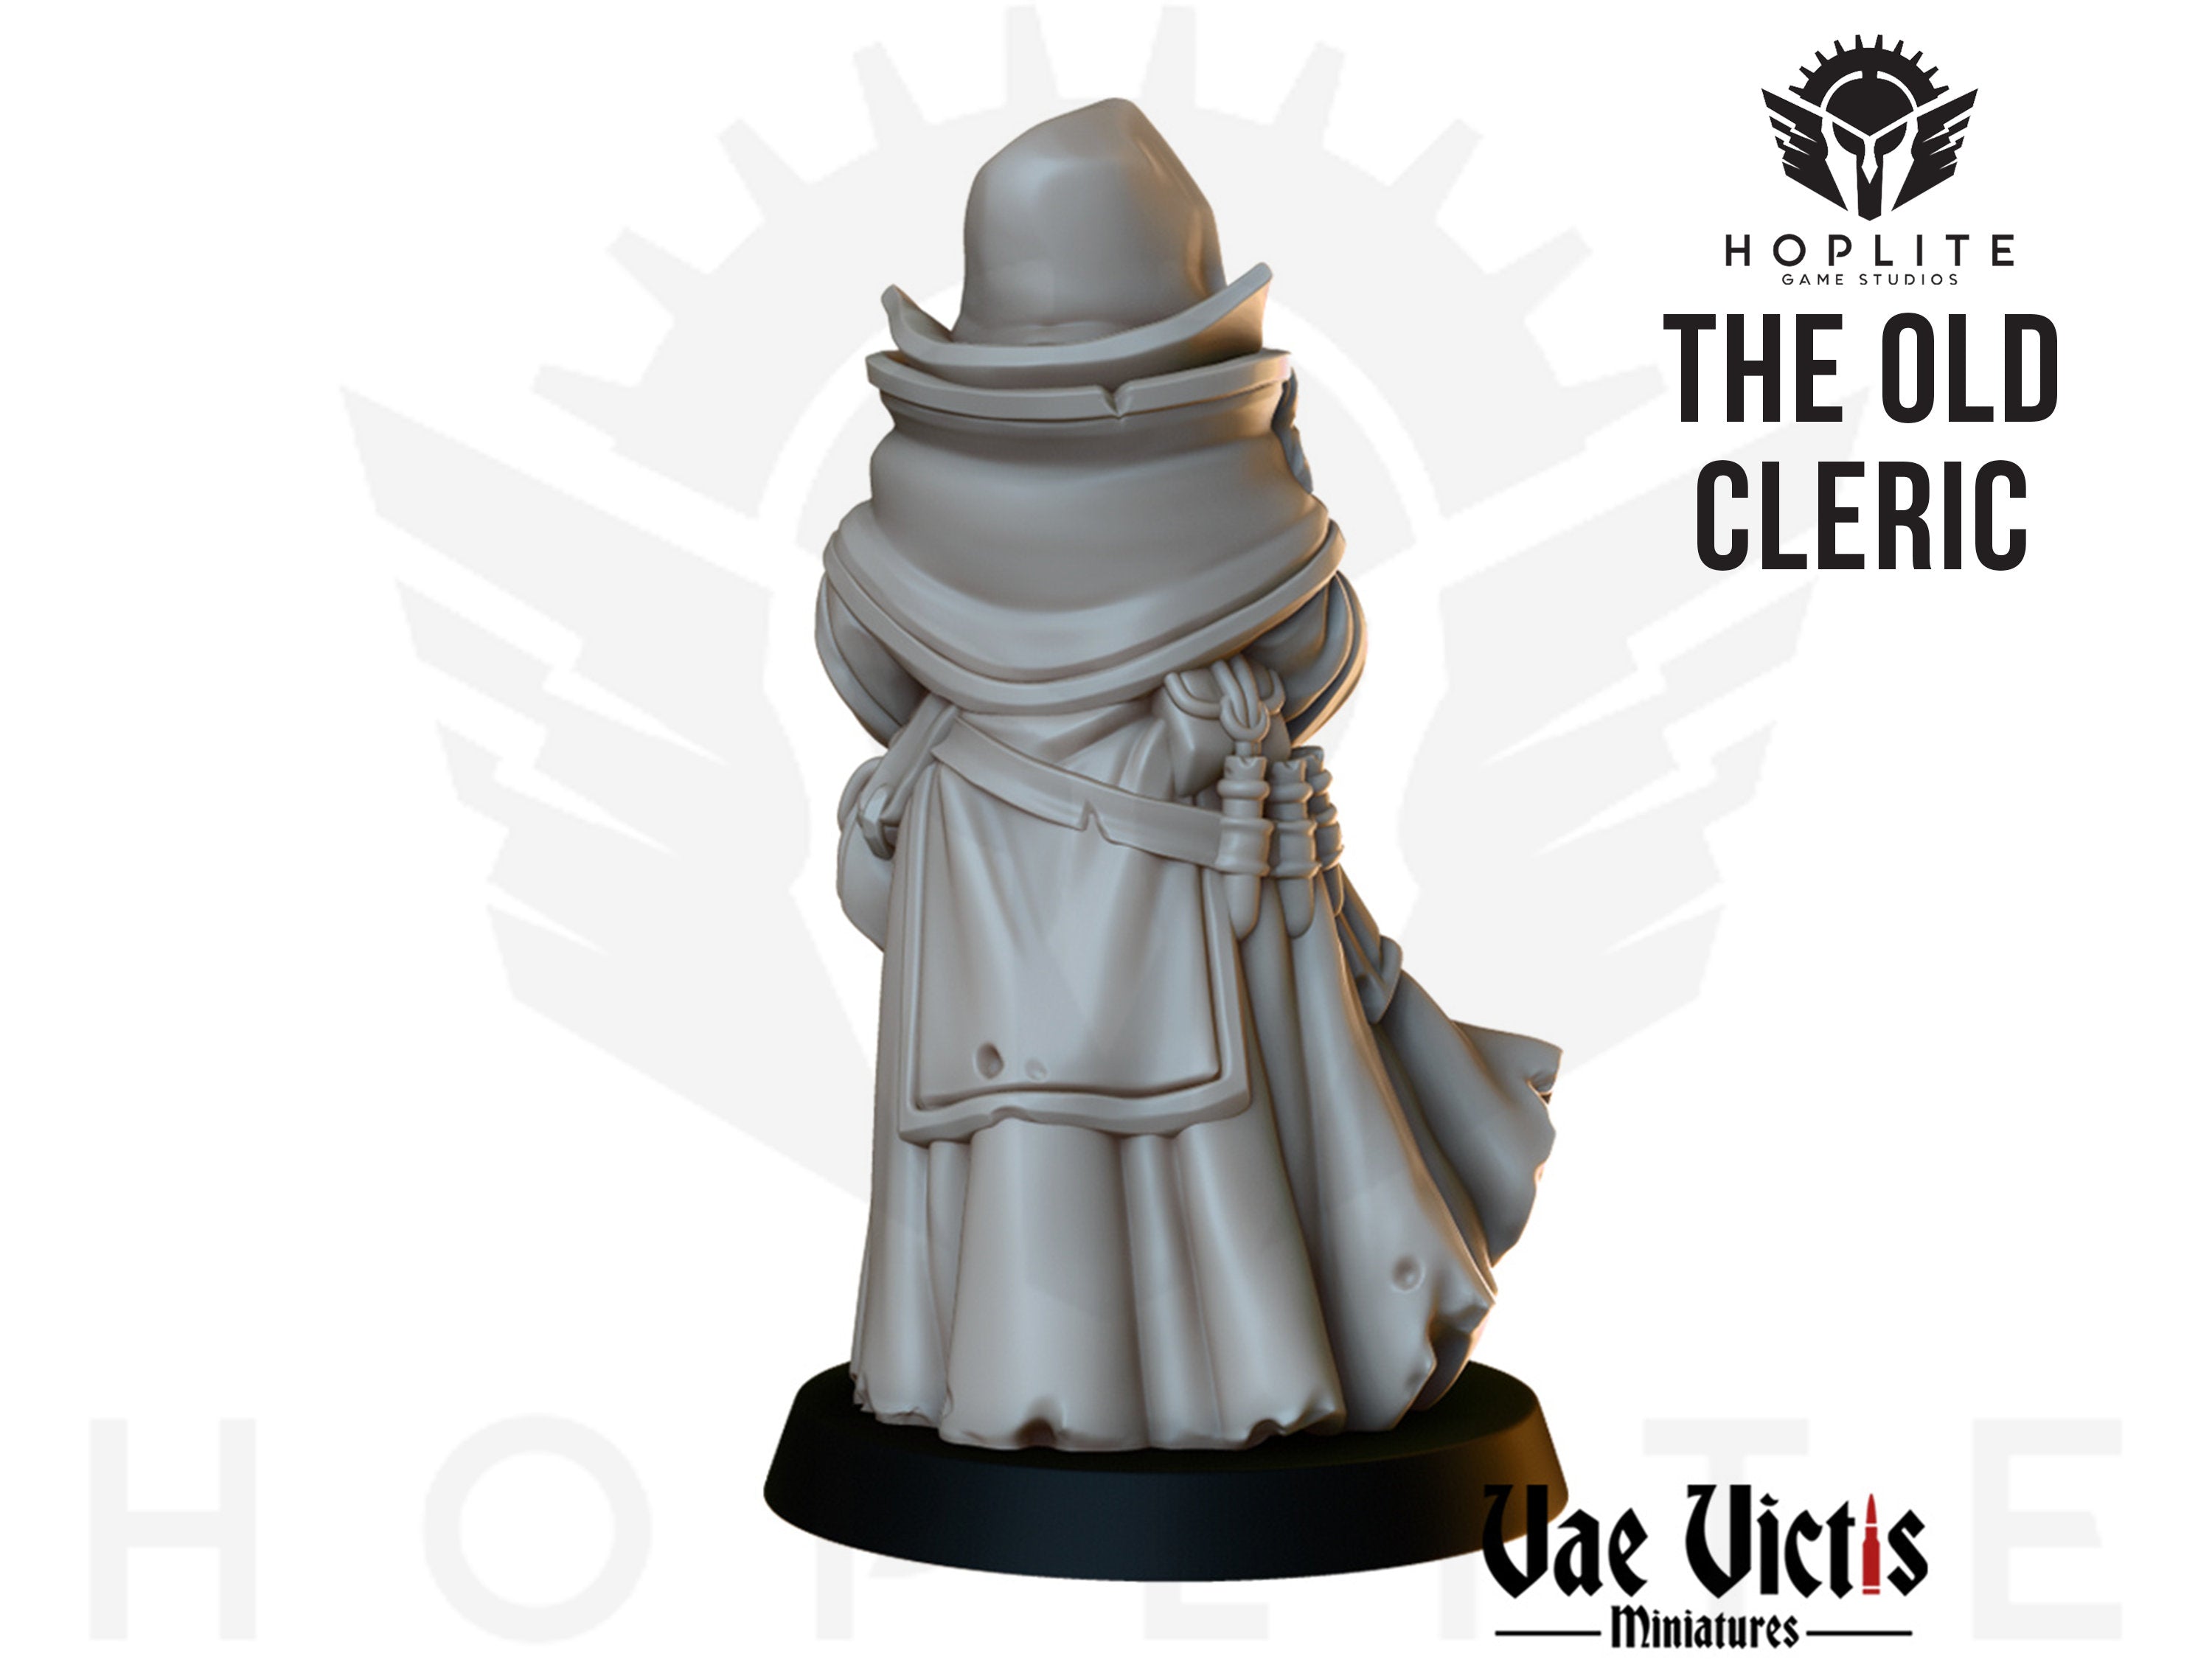 The Old Cleric